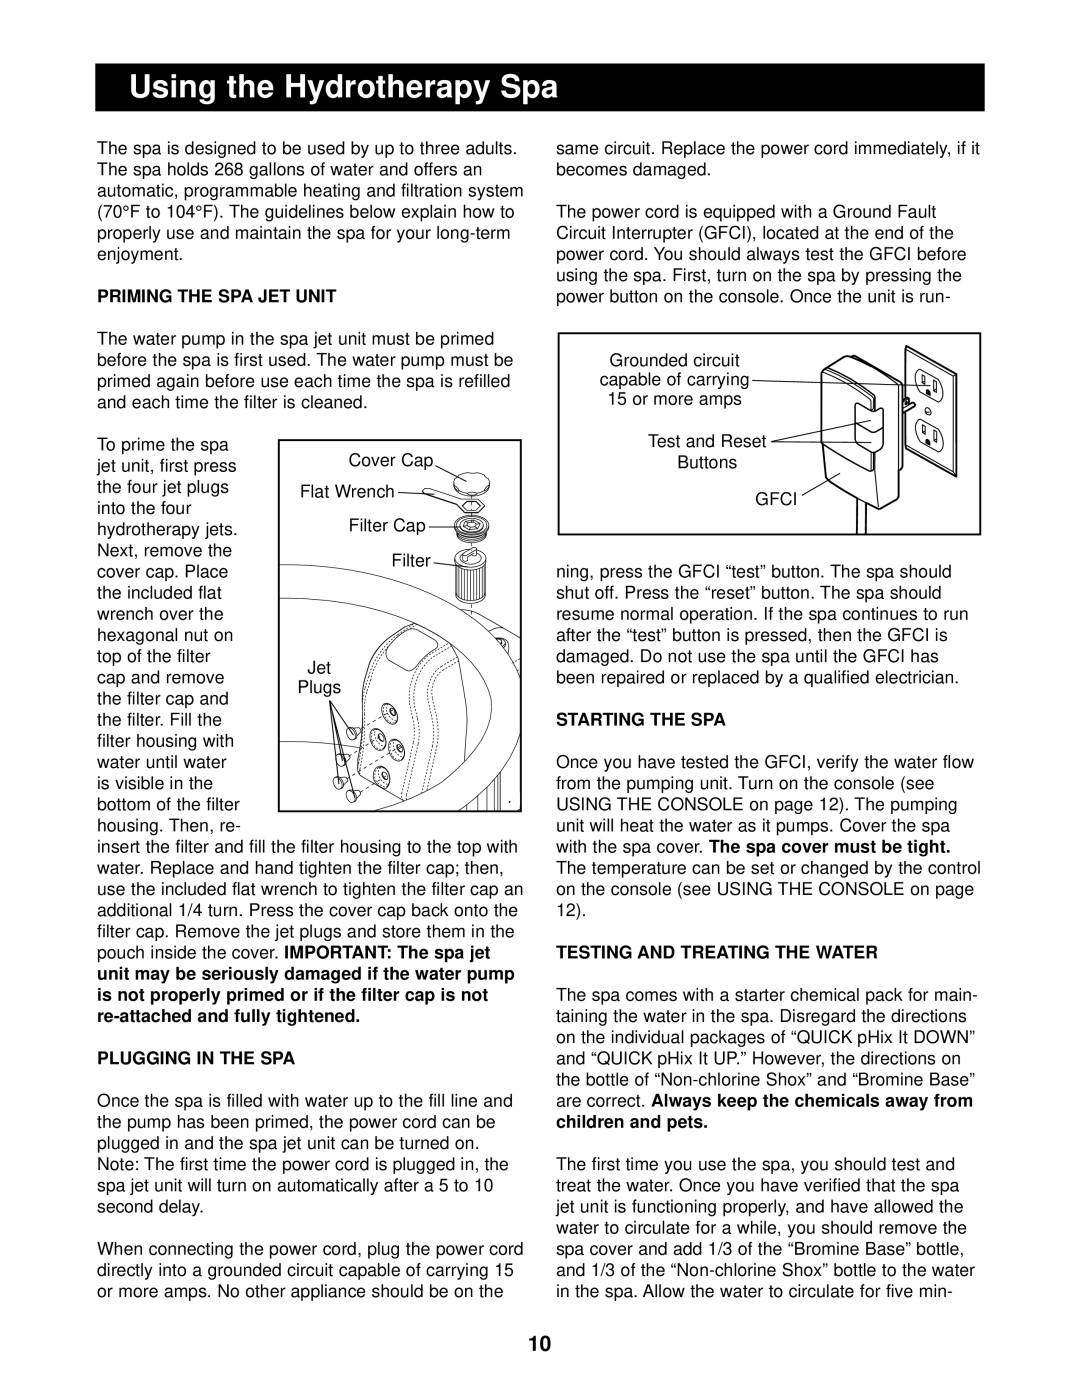 Image 831.10815 user manual Using the Hydrotherapy Spa, Priming The Spa Jet Unit, Plugging In The Spa, Starting The Spa 